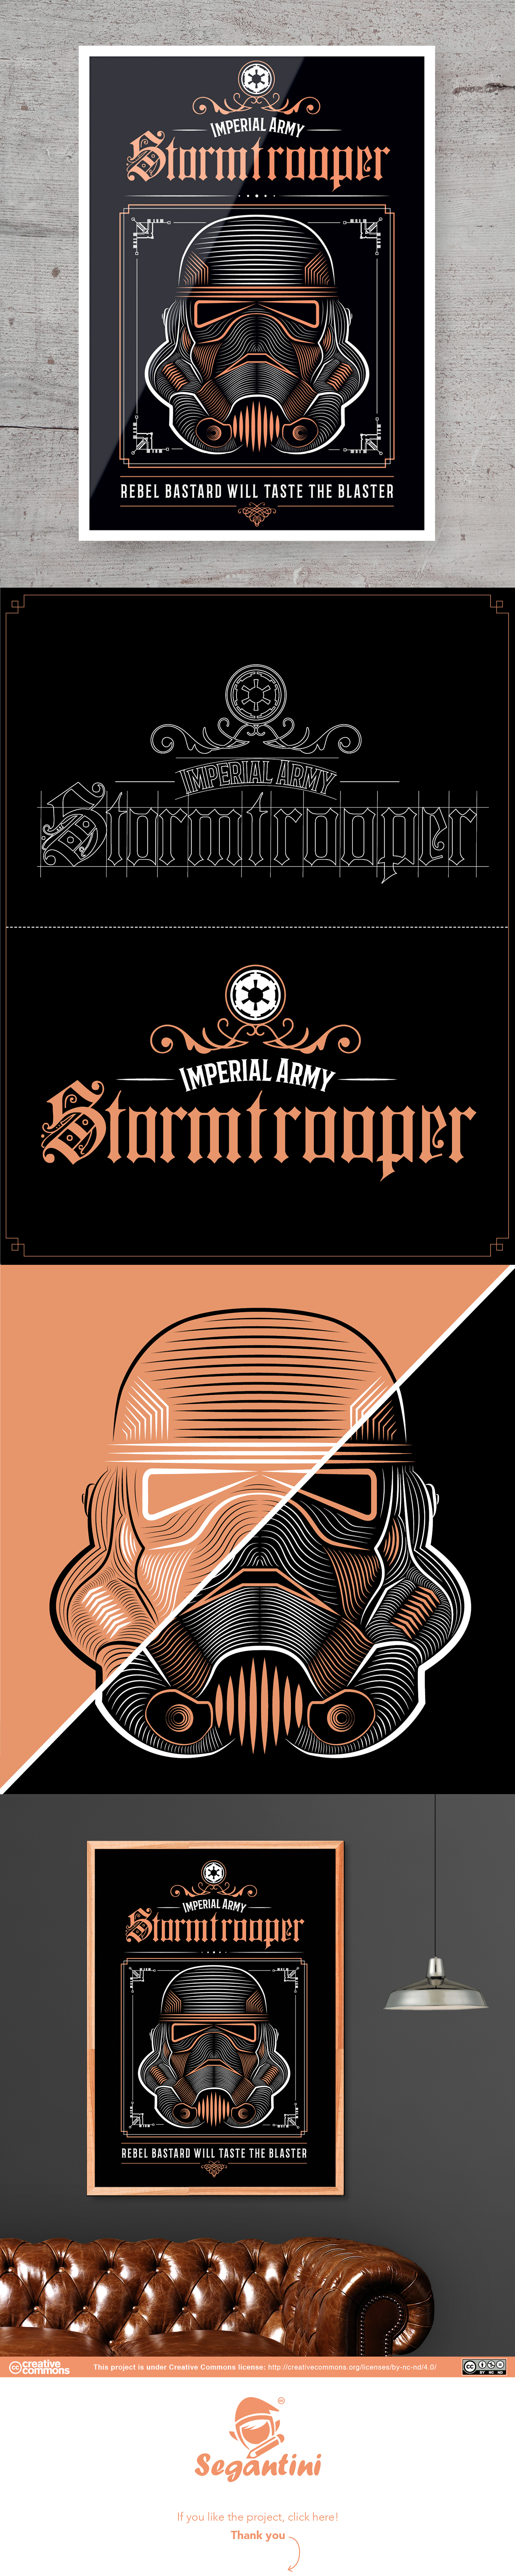 star wars stormtrooper font poster vector old Style tshirt appareal design Project